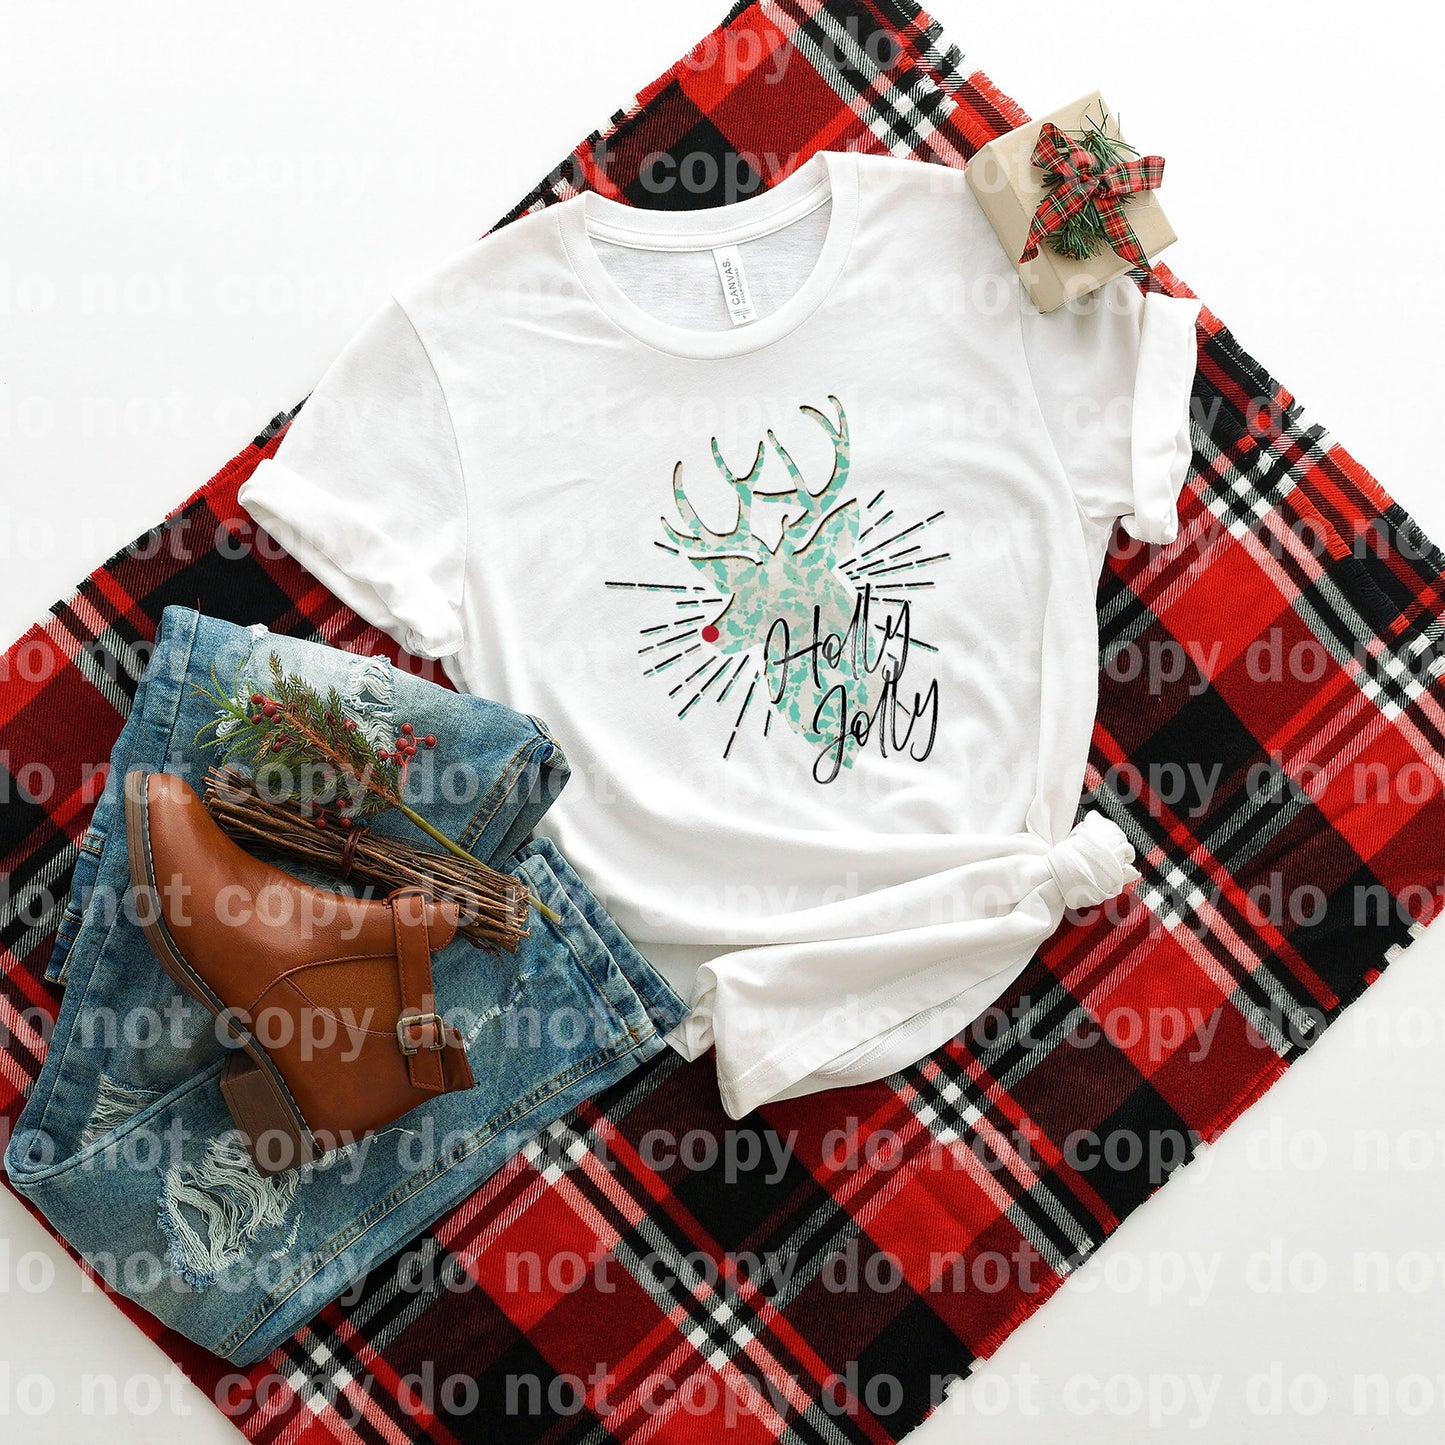 Holly Jolly Dream Print or Sublimation Print